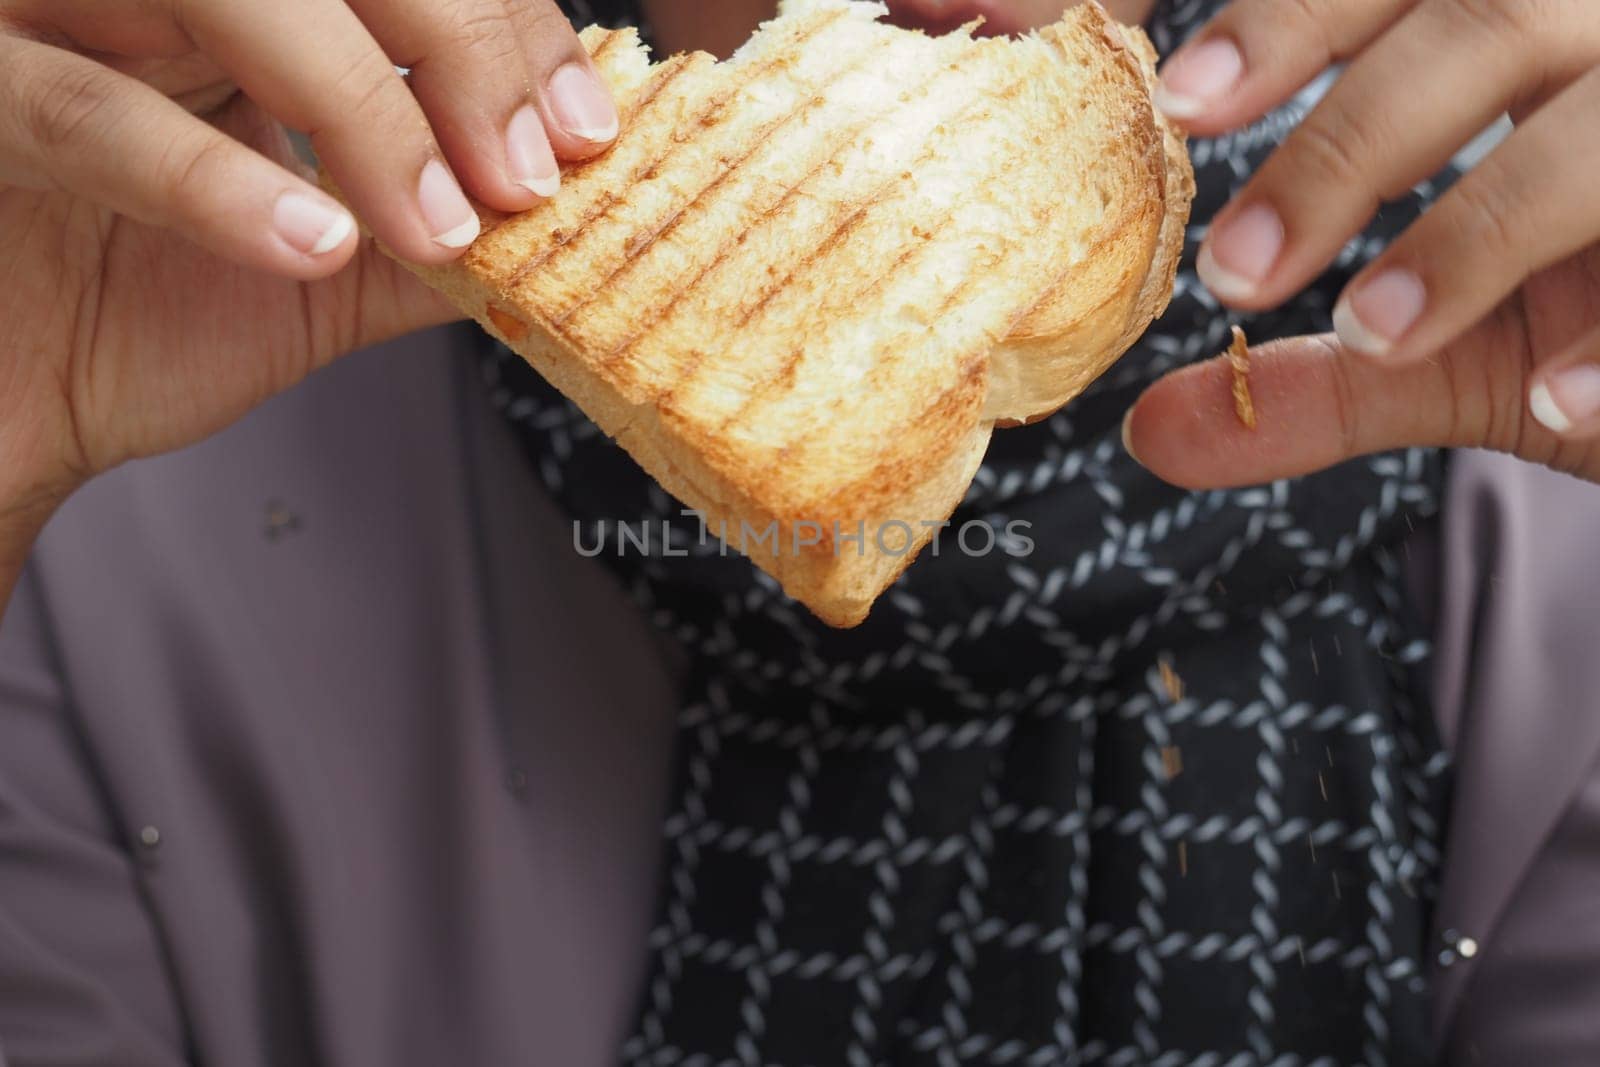 women eating toasted Sandwich with ham and cheese, by towfiq007